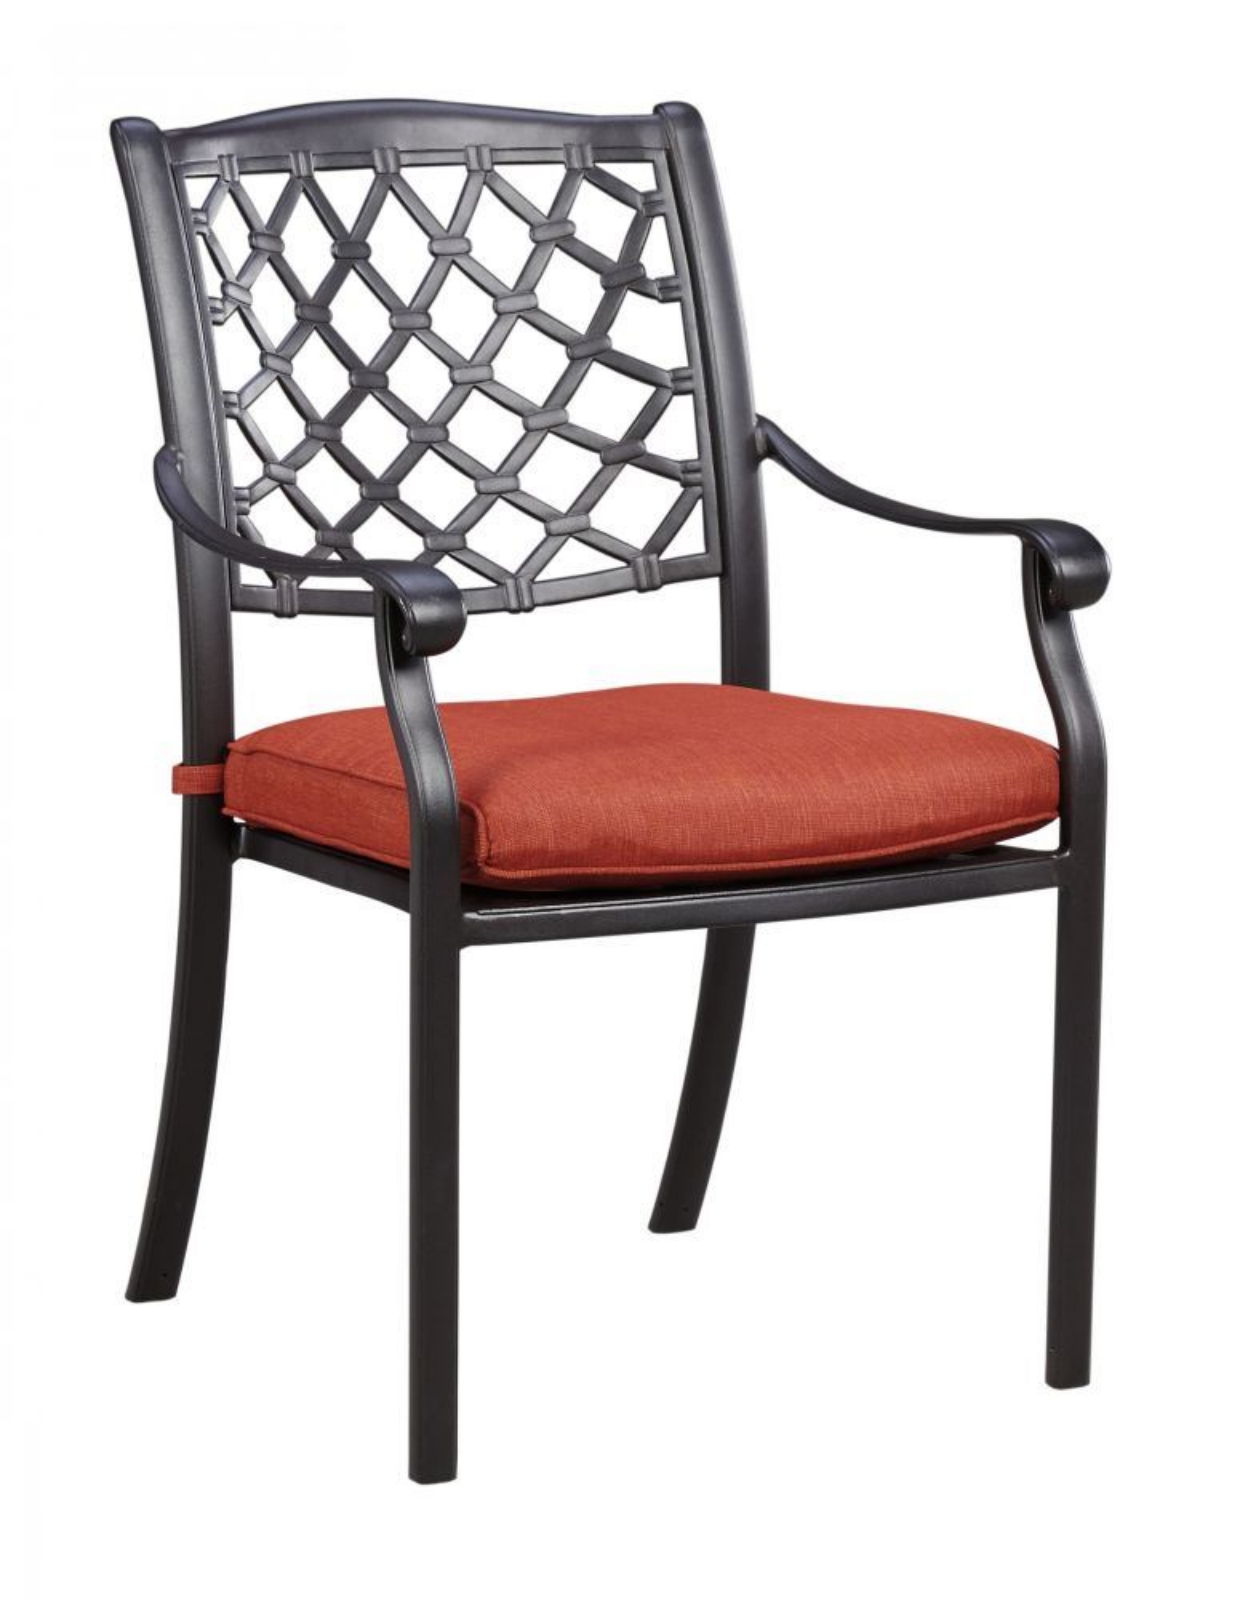 Picture of Tanglevale Patio Chairs (Set of 4 Chairs)